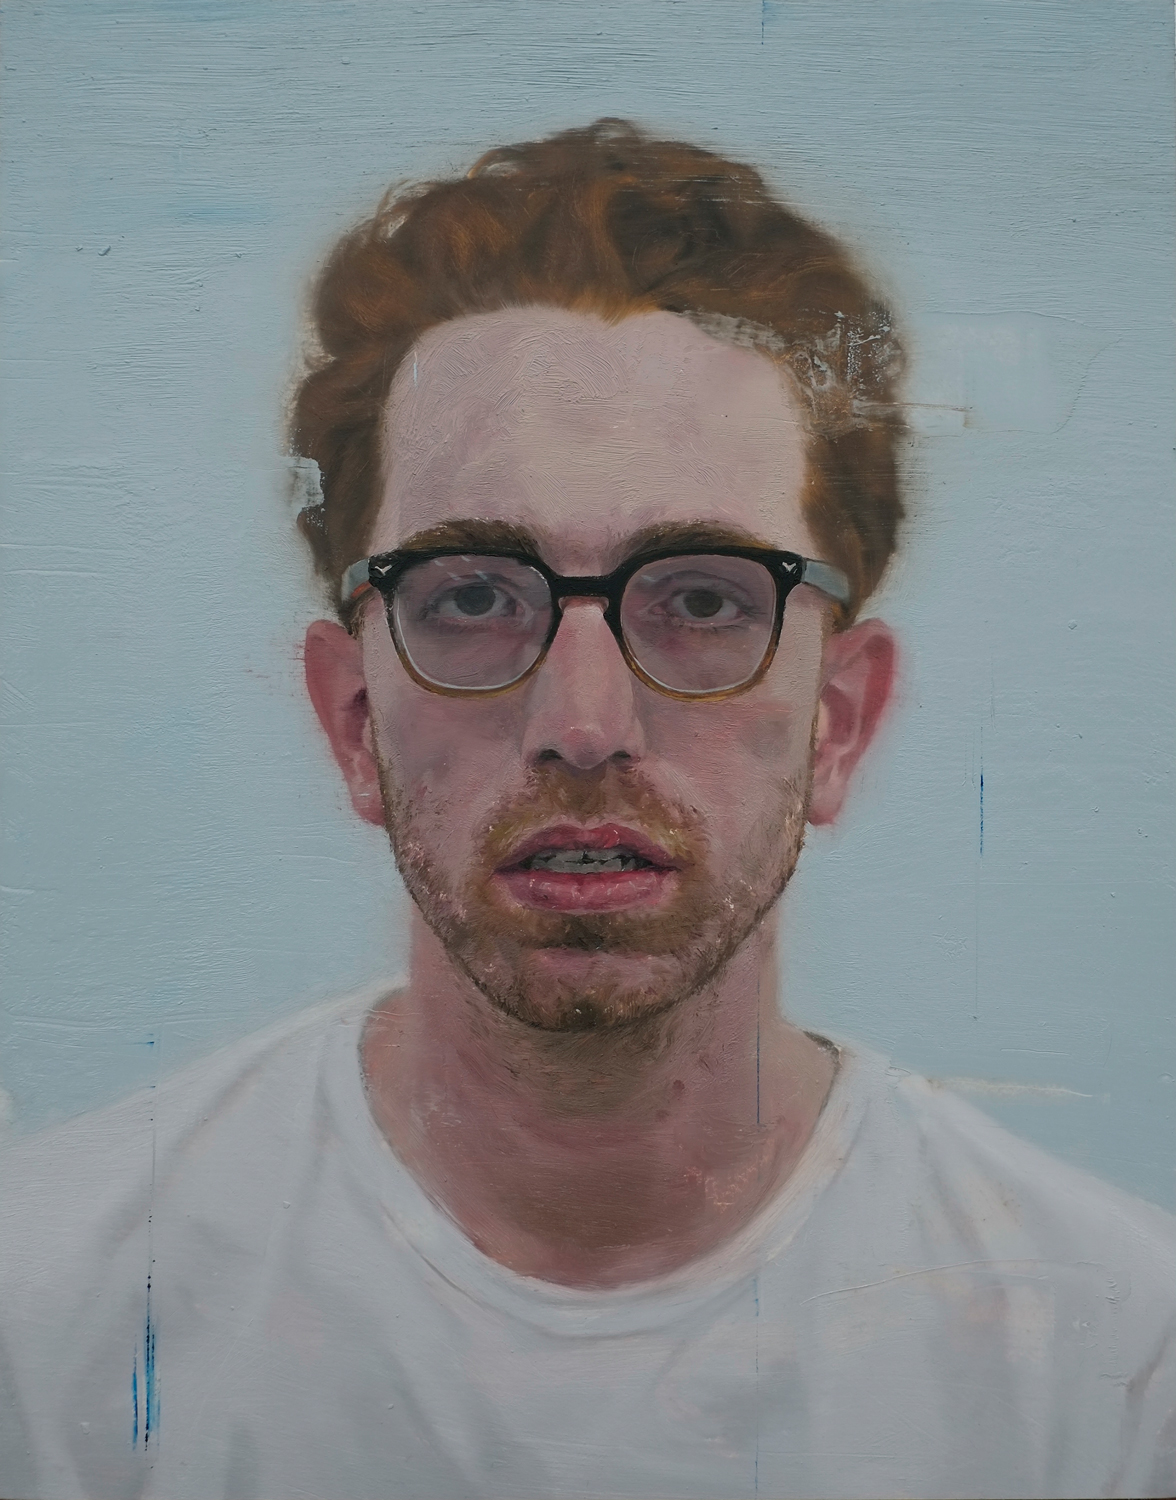   Gabe 2  Oil on Wood 14 x 10 inches   